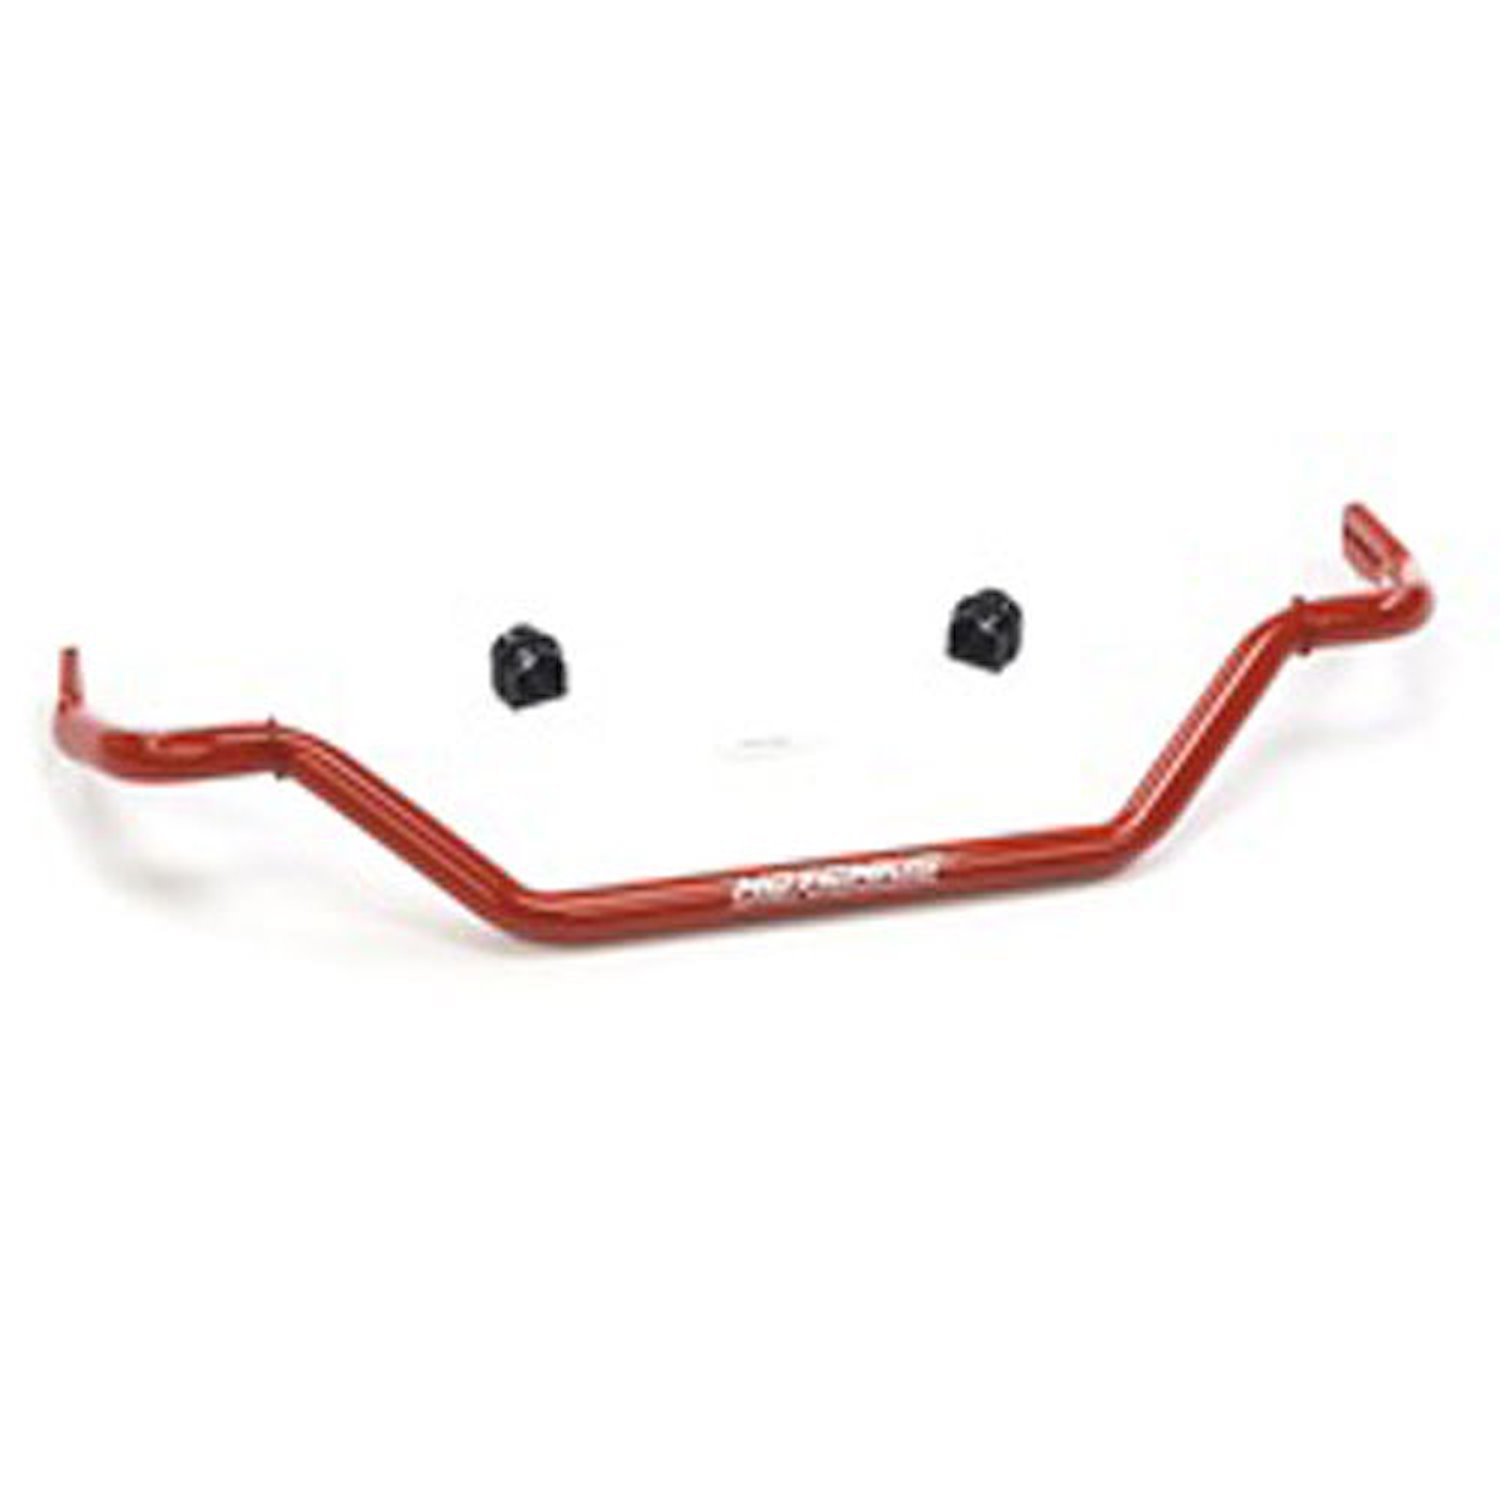 Front Sway Bar 2003-2007 for Nissan 350z, Infiniti G35